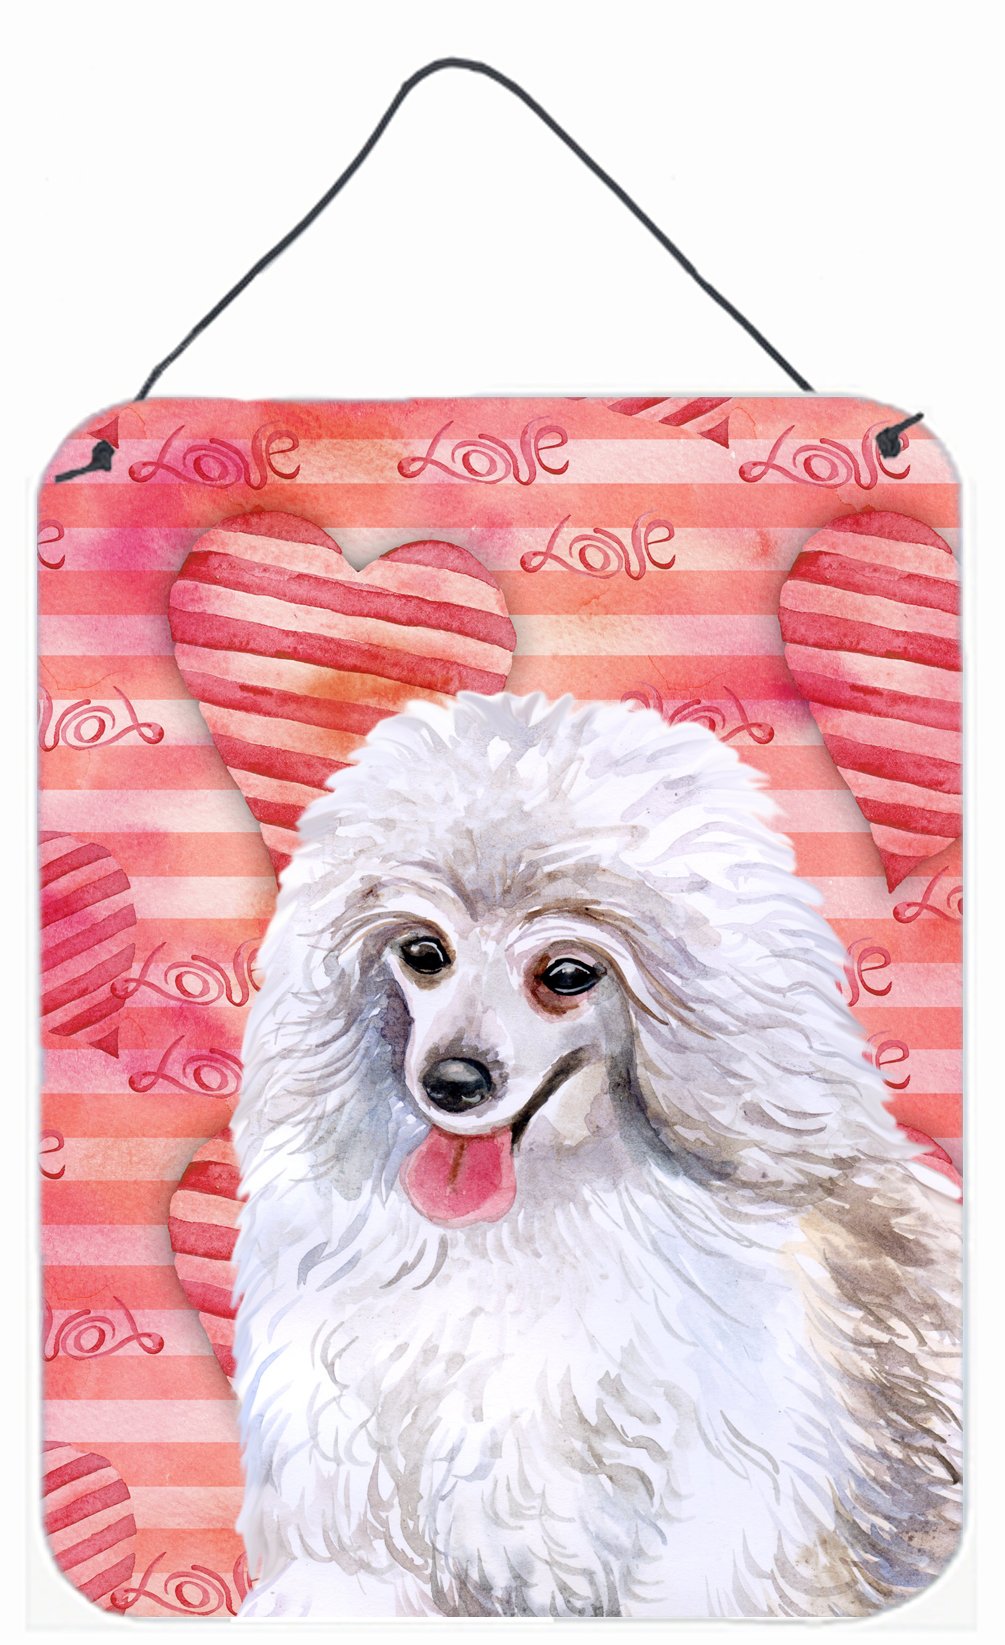 Medium White Poodle Love Wall or Door Hanging Prints BB9770DS1216 by Caroline's Treasures